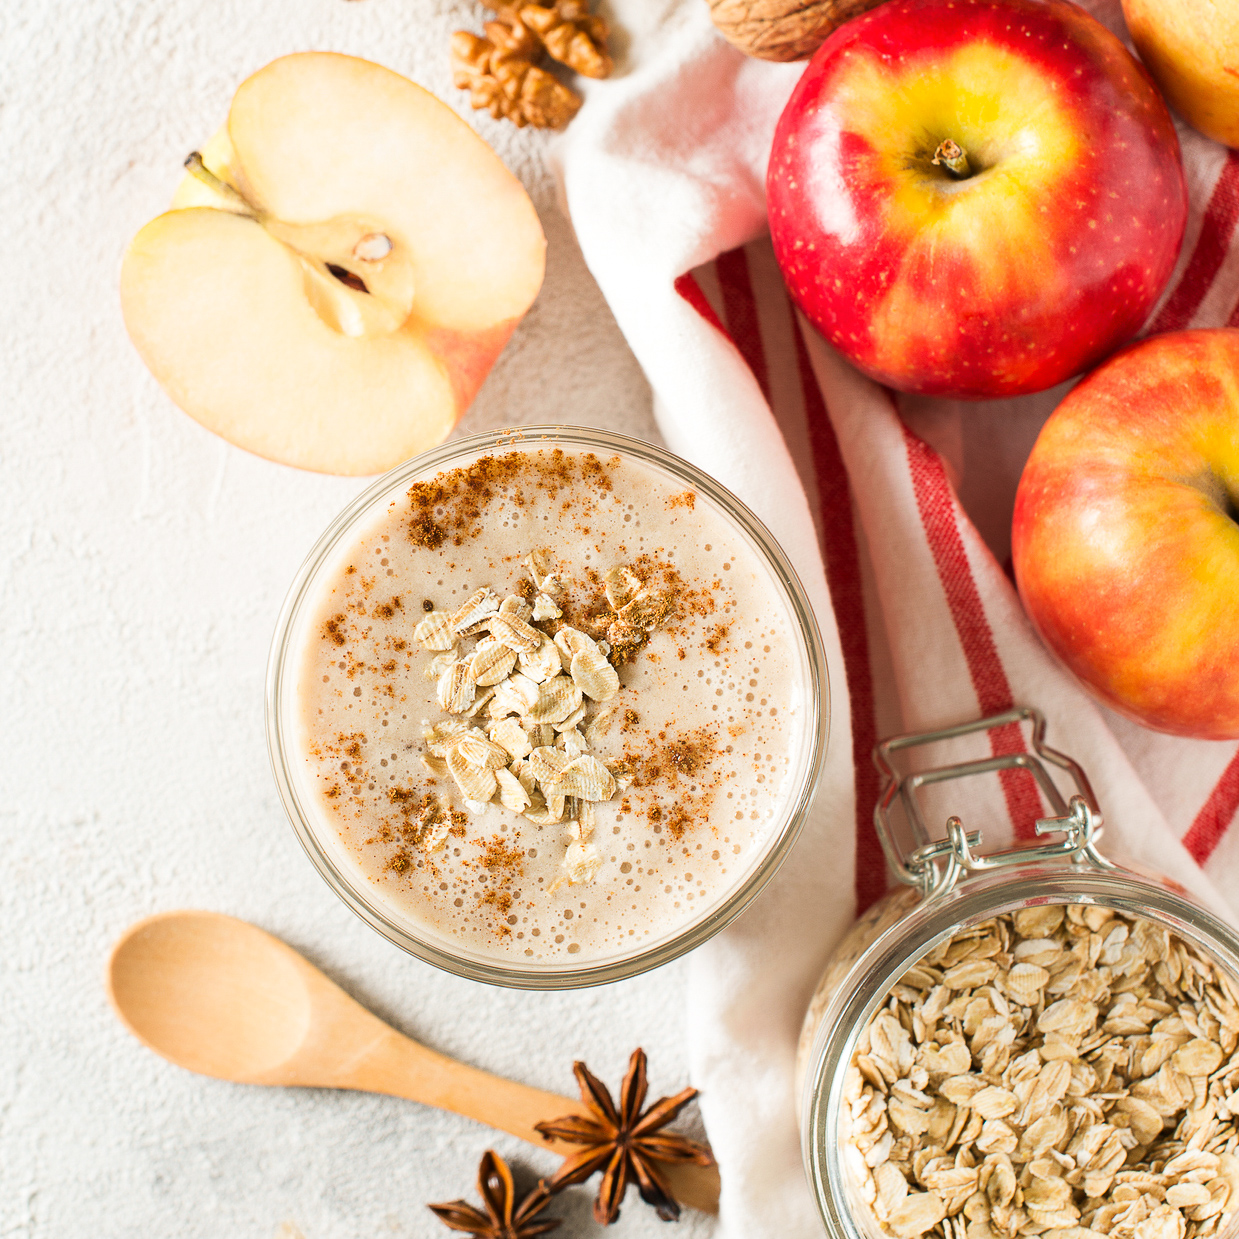 Apple & Oats Smoothie